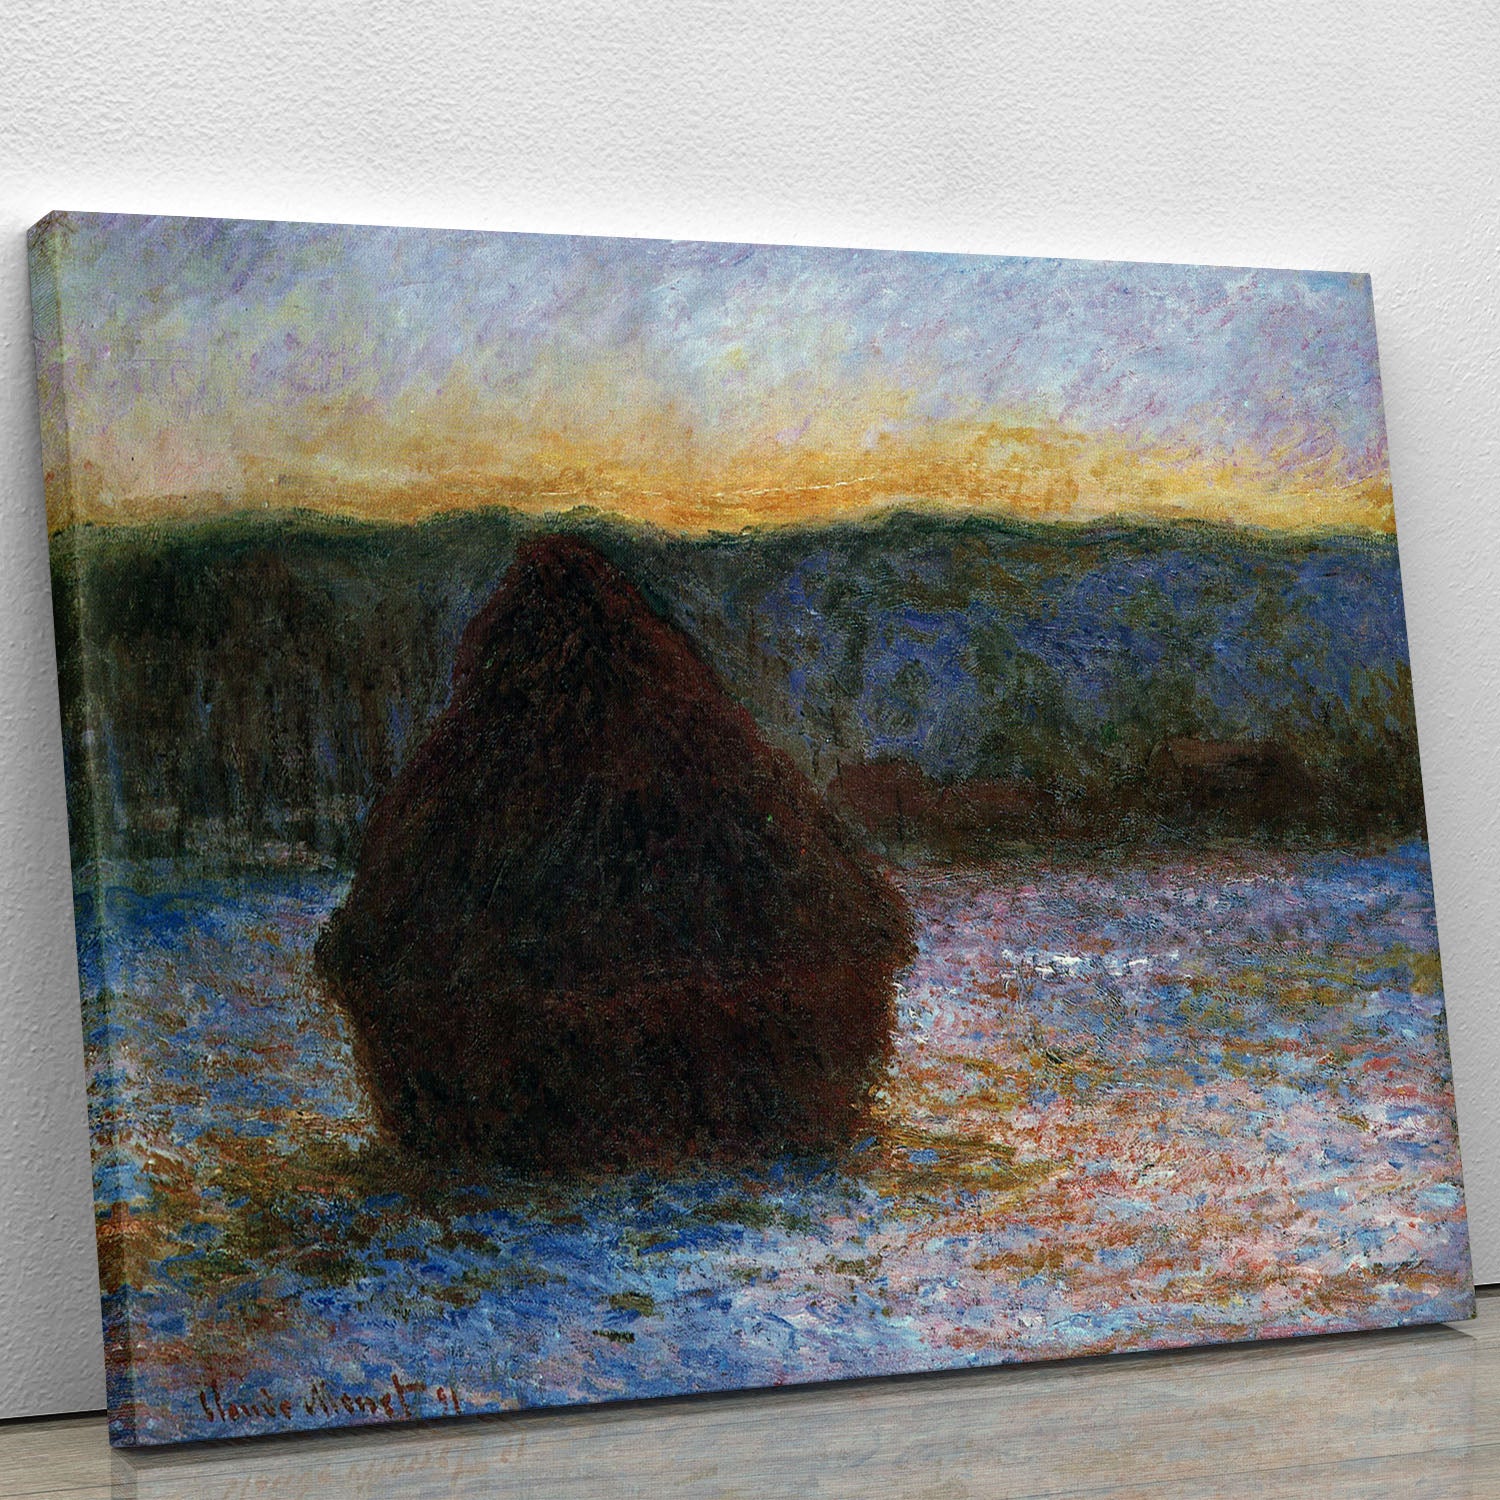 Haylofts thaw sunset by Monet Canvas Print or Poster - Canvas Art Rocks - 1